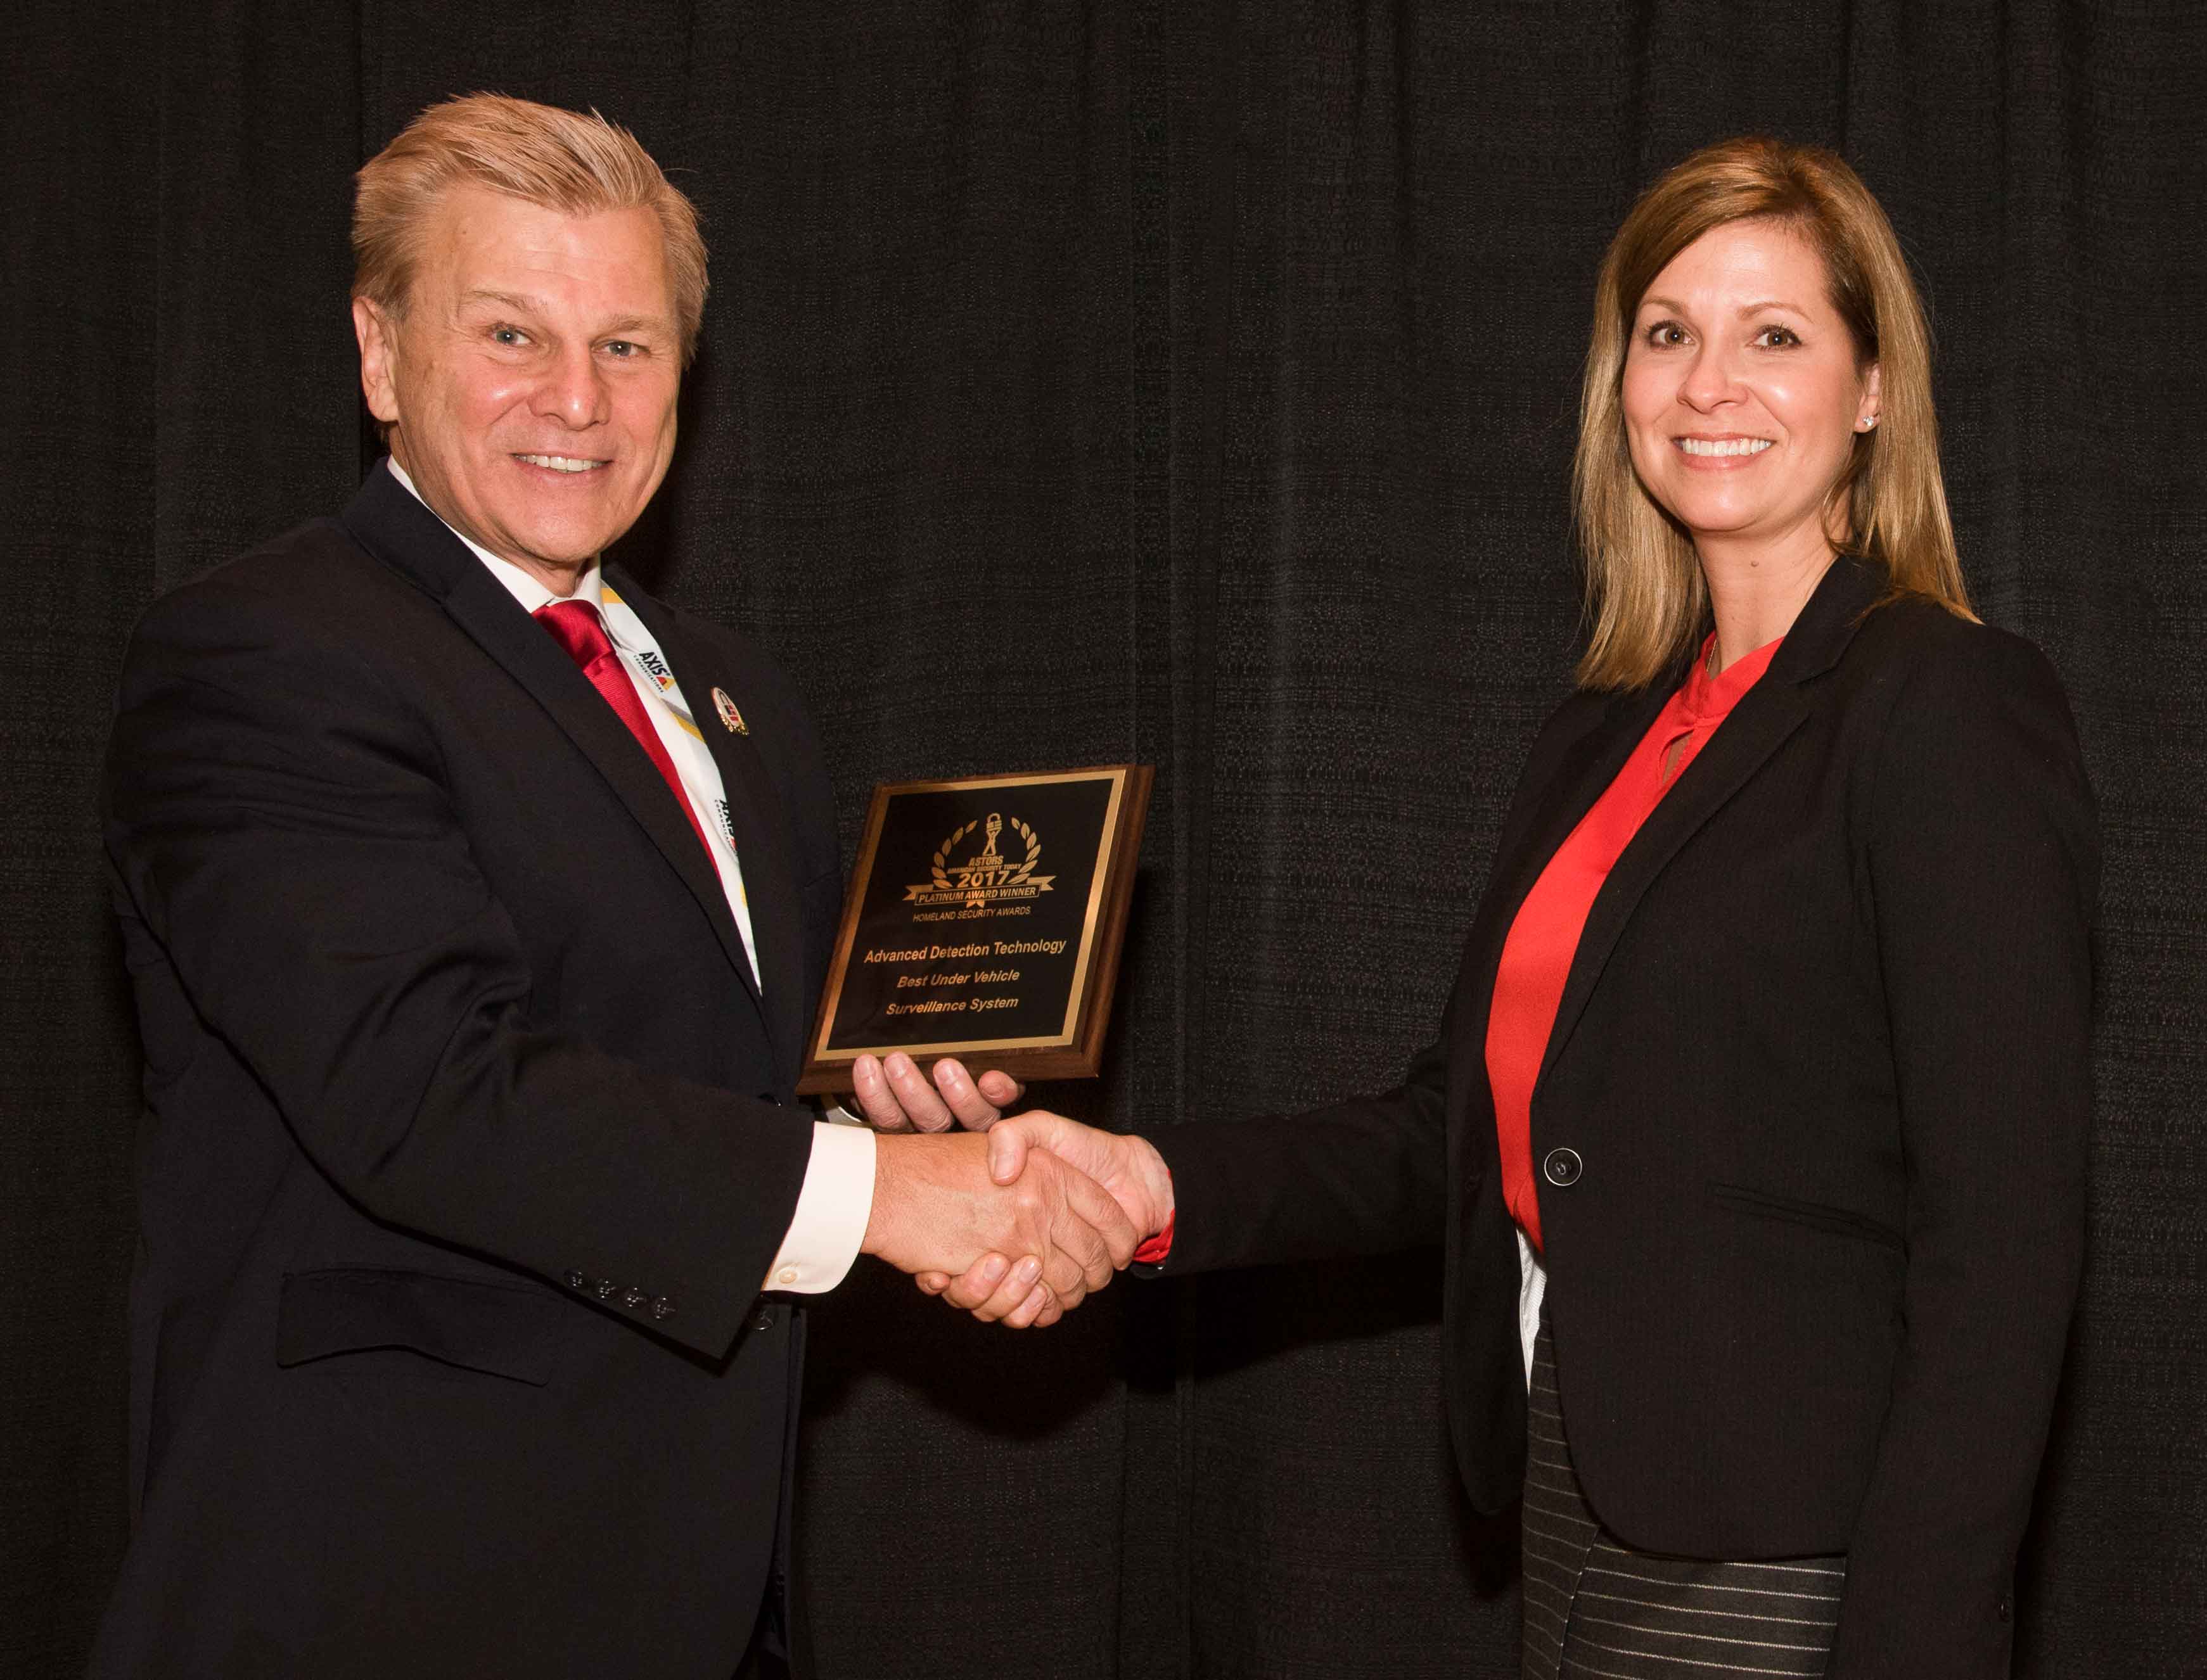 Angela Hayworth, Marketing Manager for Advanced Detection Technology, accepting the company's 2017 'ASTORS' Award at ISC East.